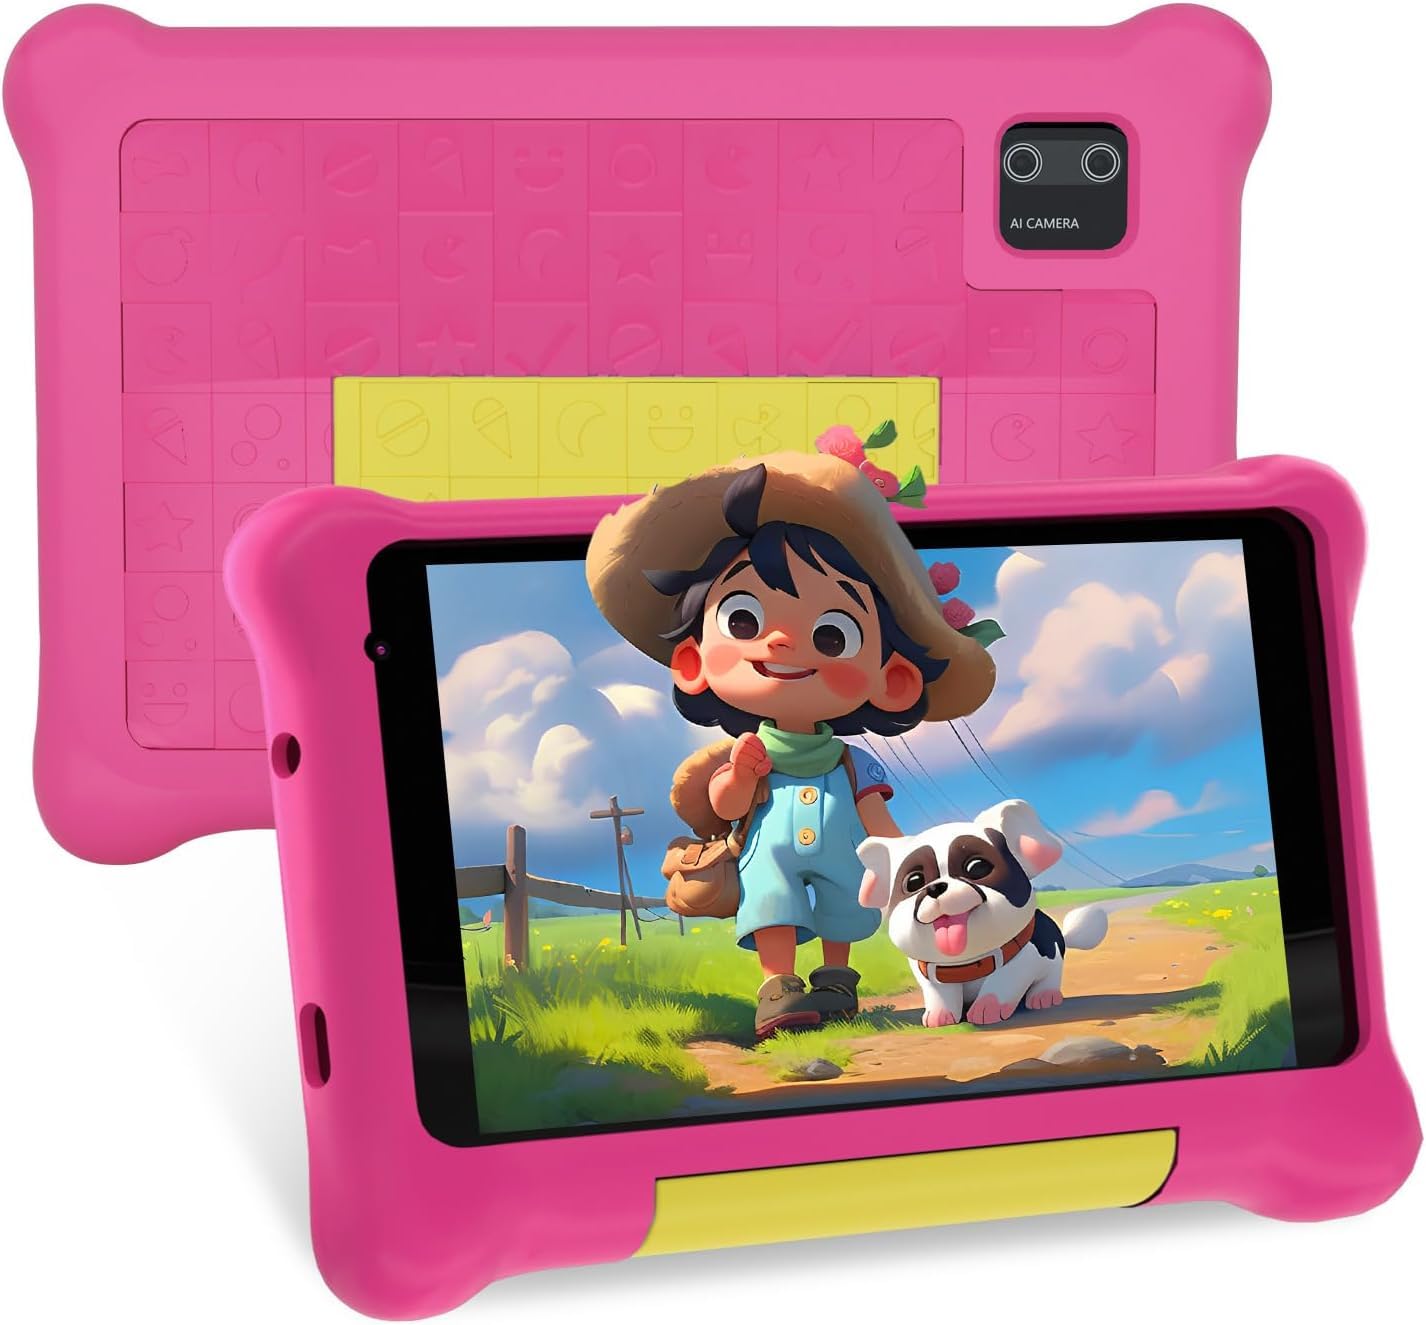 Lville Kids Tablet 7 inch, Android 12 Tablet for Kids,IPS HD Display,Dual Camera,Kidoz Preinstalled,Parental Control Tablets (Pink)